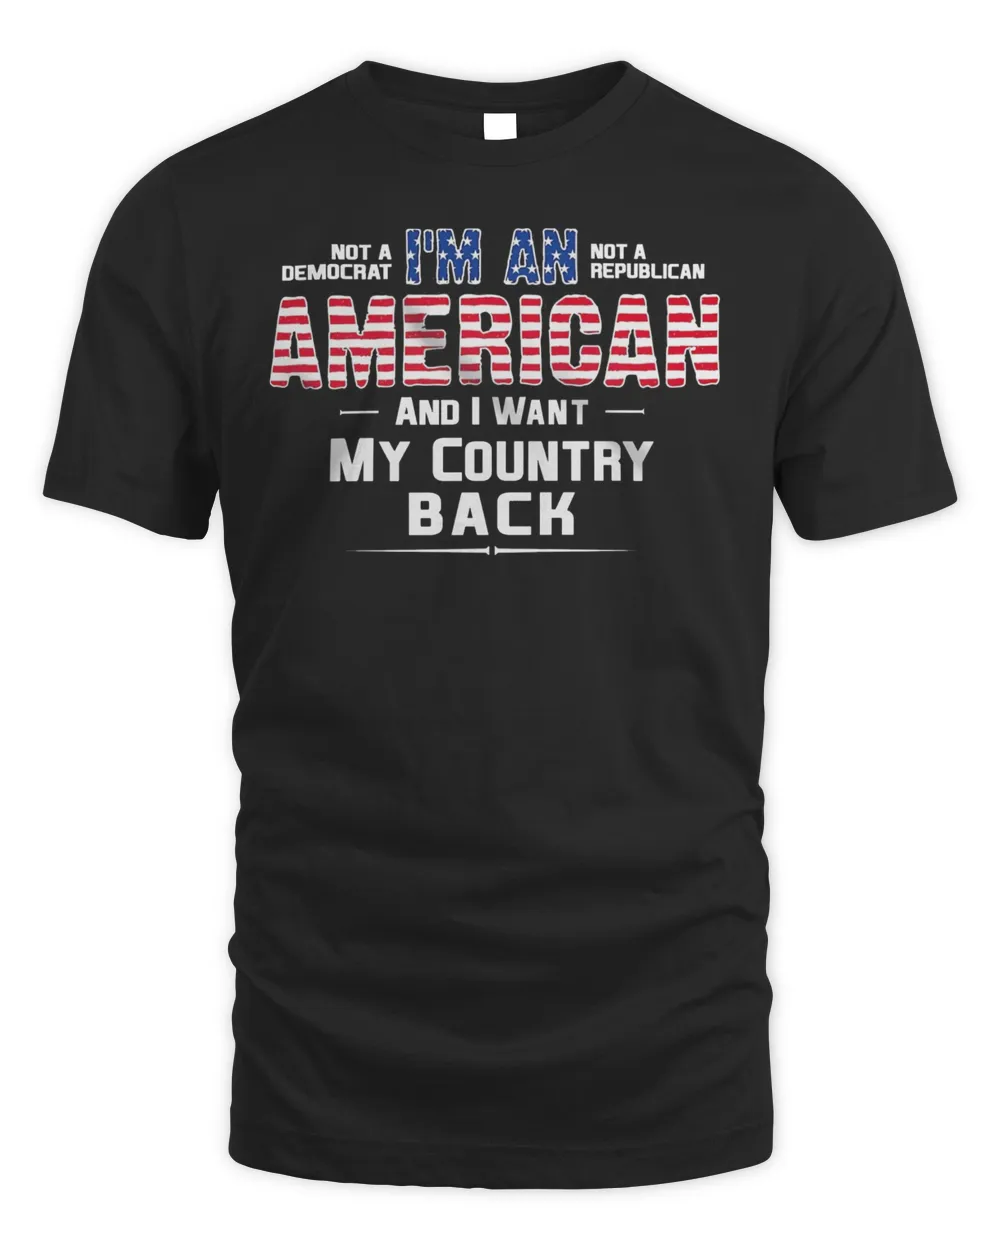 Not A Democrat I'm An Not A Republican American And I Want My Country Back Shirt